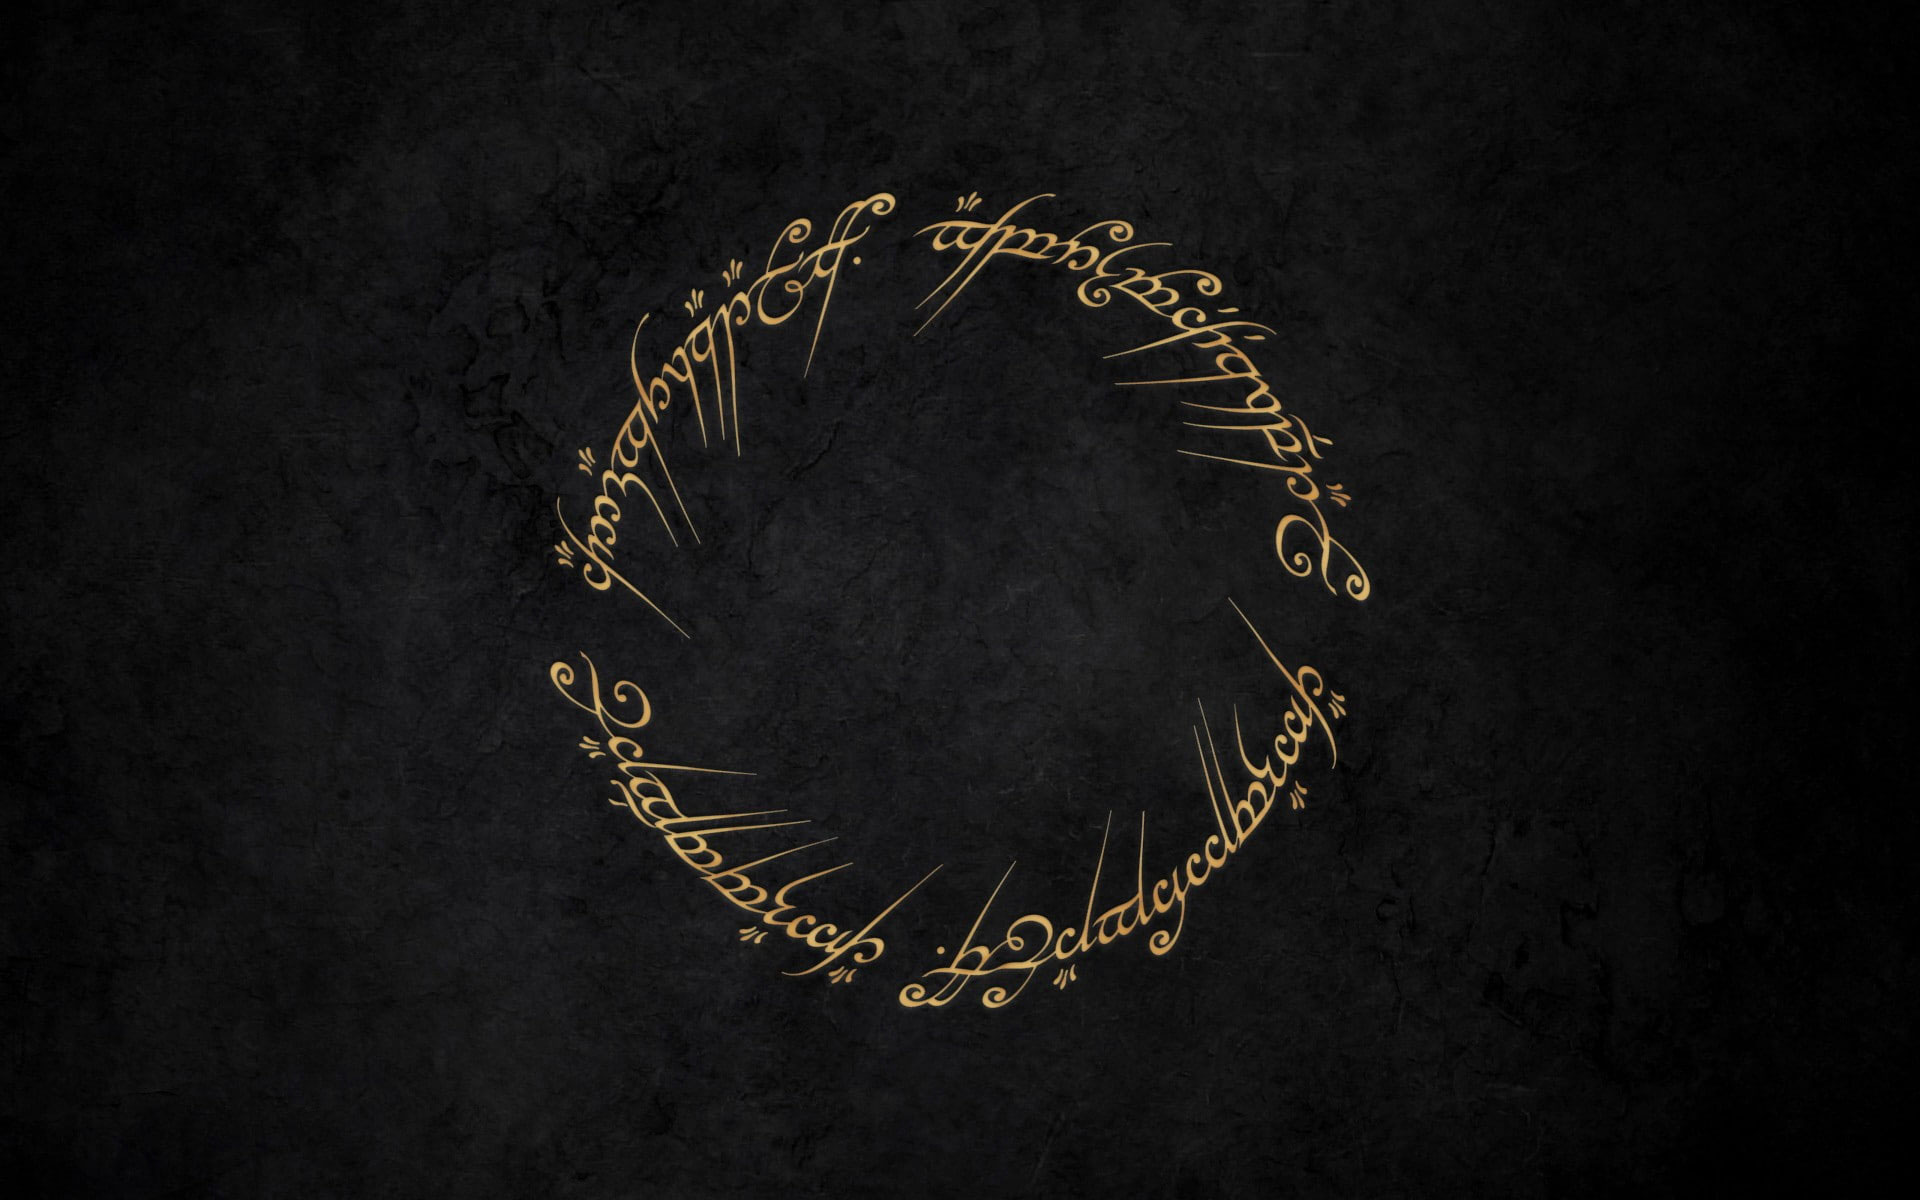 The Lord of the Rings wallpaper, J. R. R. Tolkien